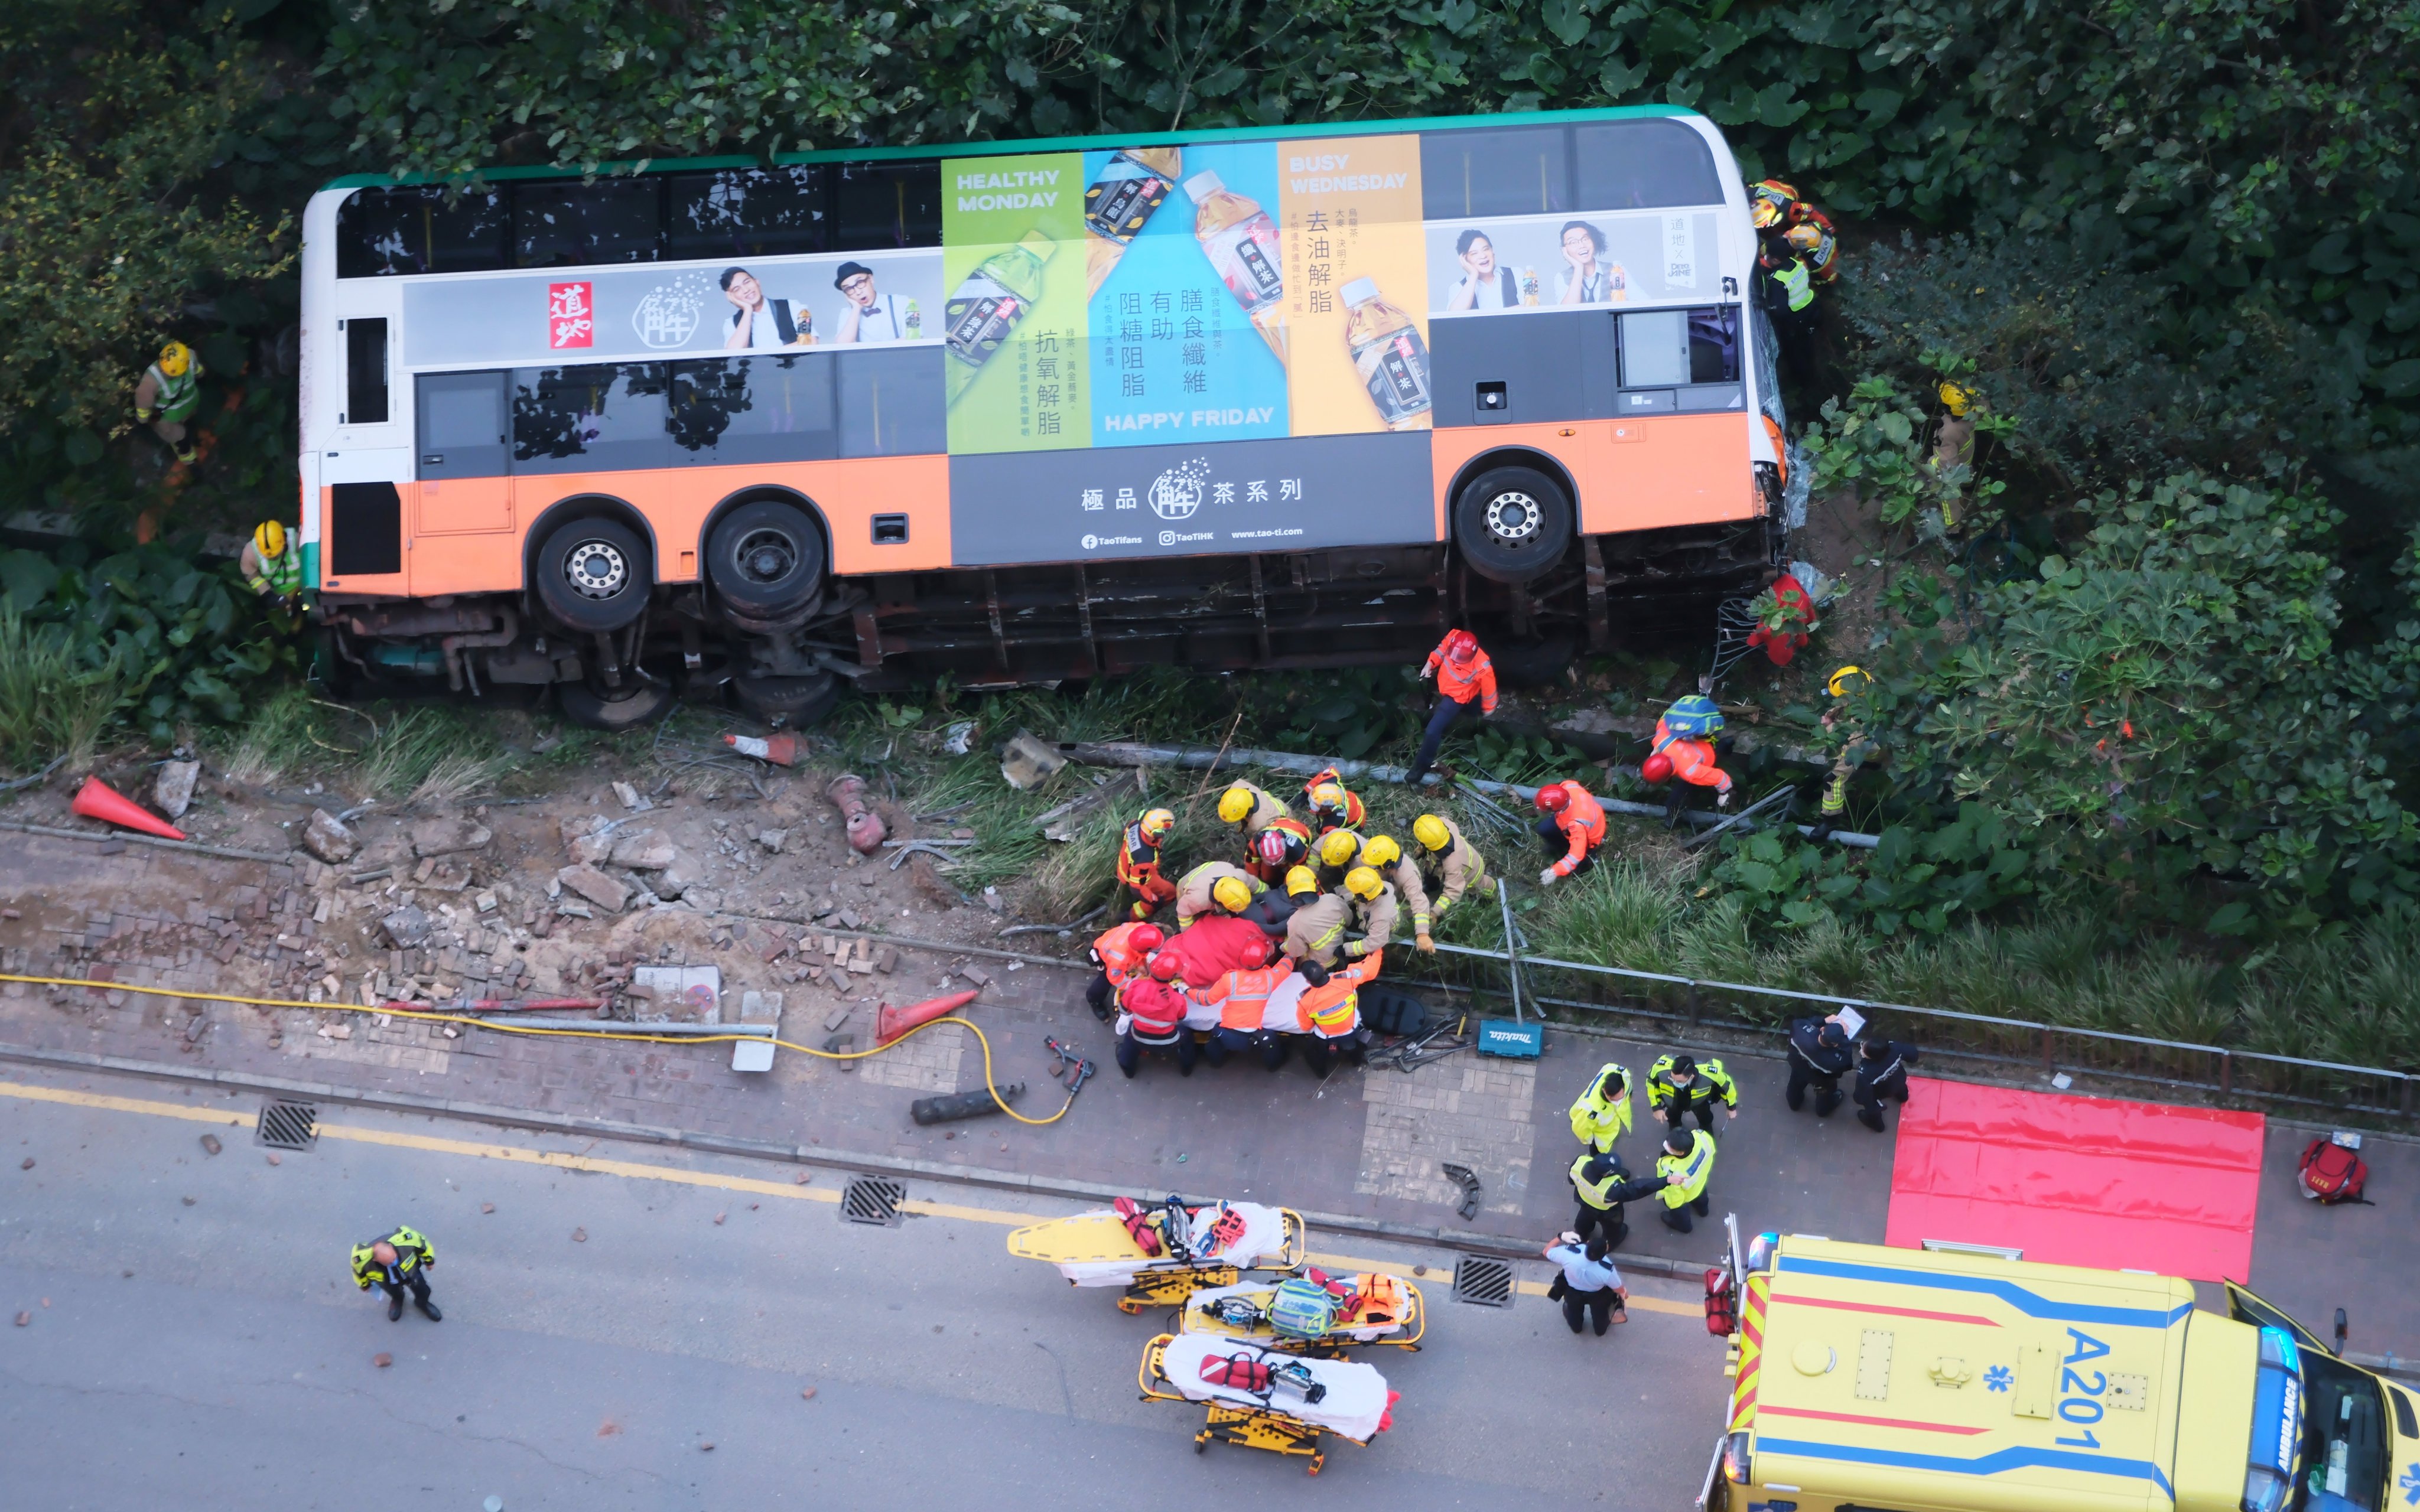 More than 30 passengers were injured after a bus overturned in Tseung Kwan O on New Year’s Day. Photo: Sun Yeung